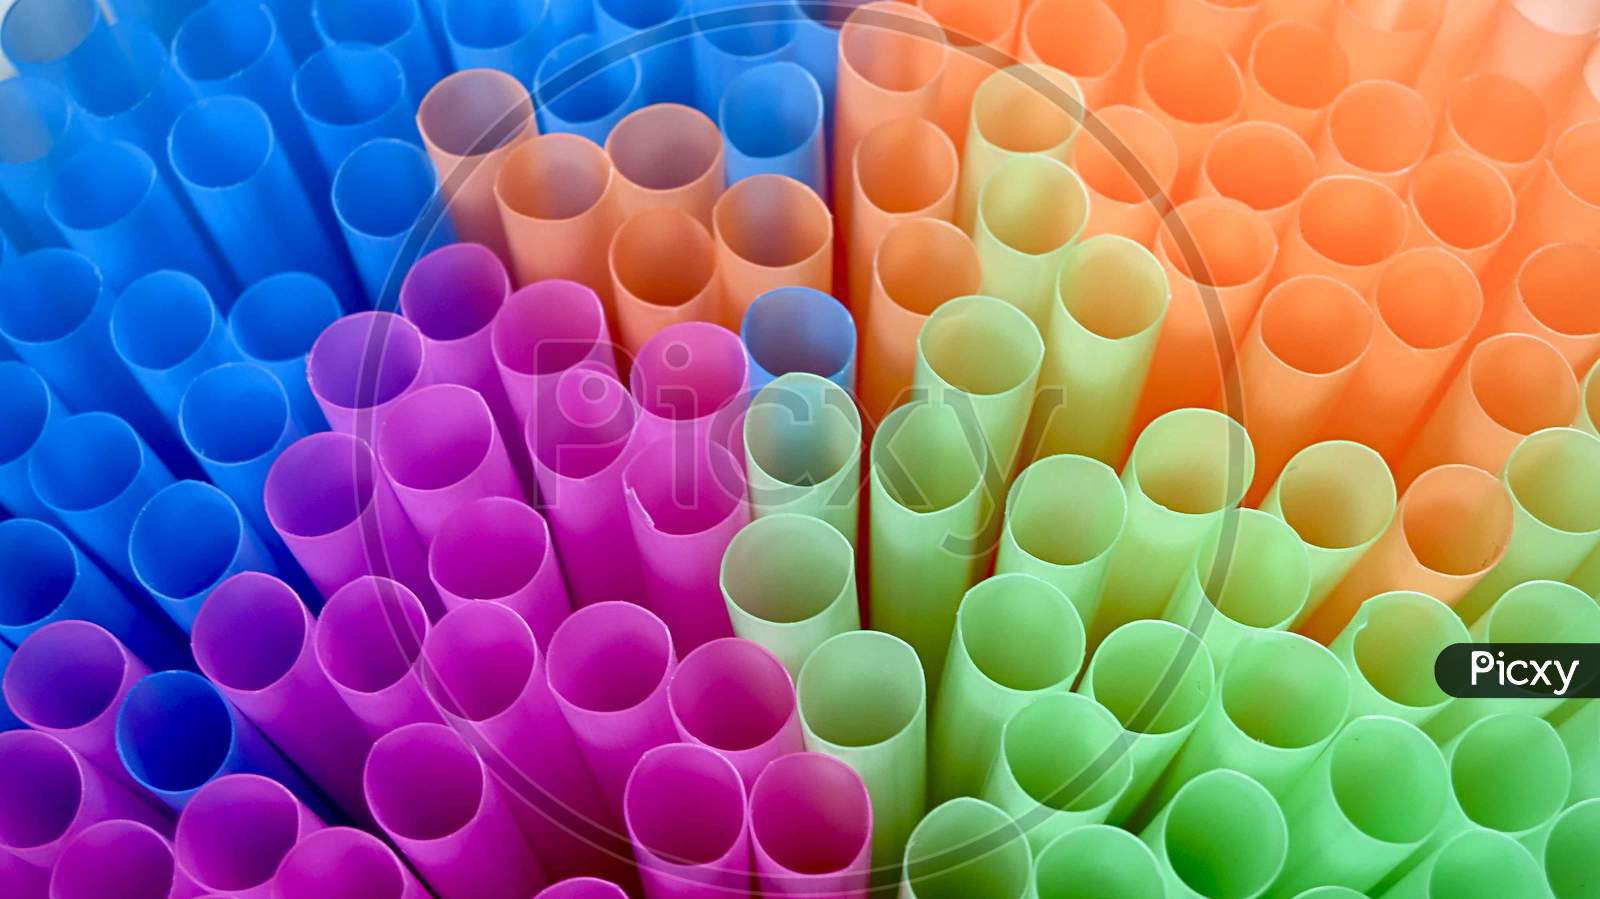 Bunch of colourful drinking straws in close-up